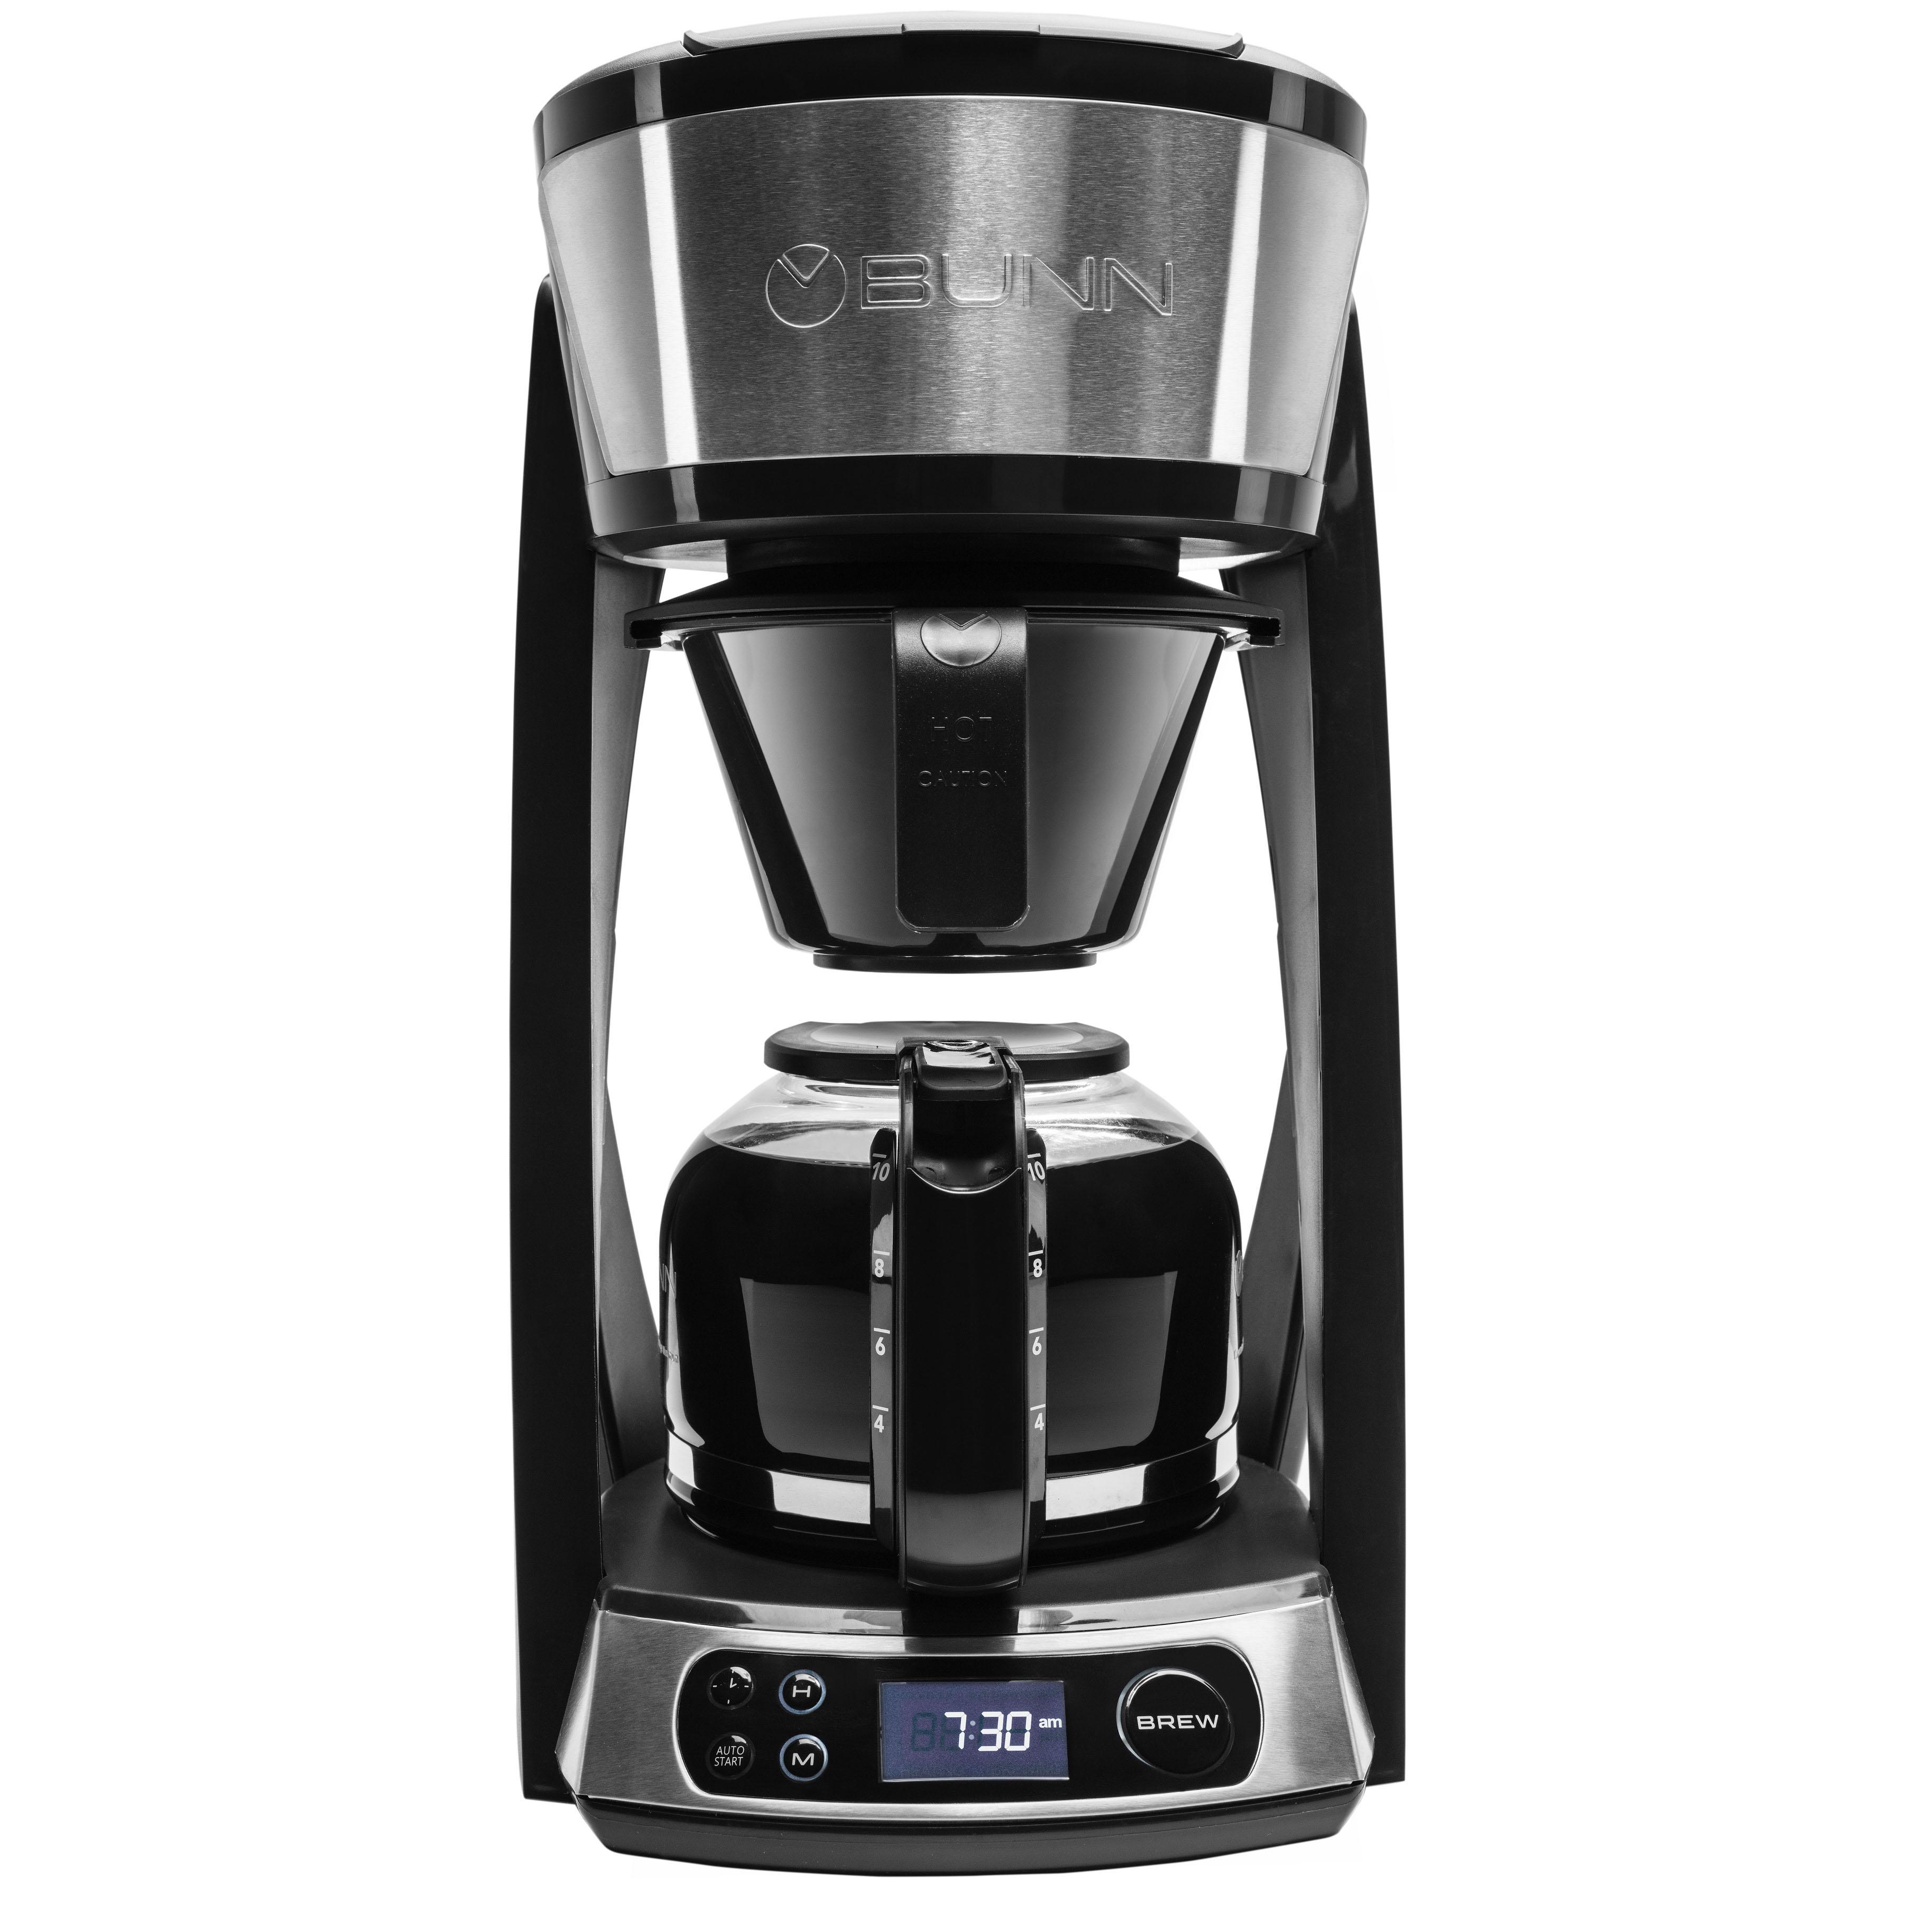 BUNN 10-Cup Heat N Brew Programmable Coffee Maker for $48.80 Shipped